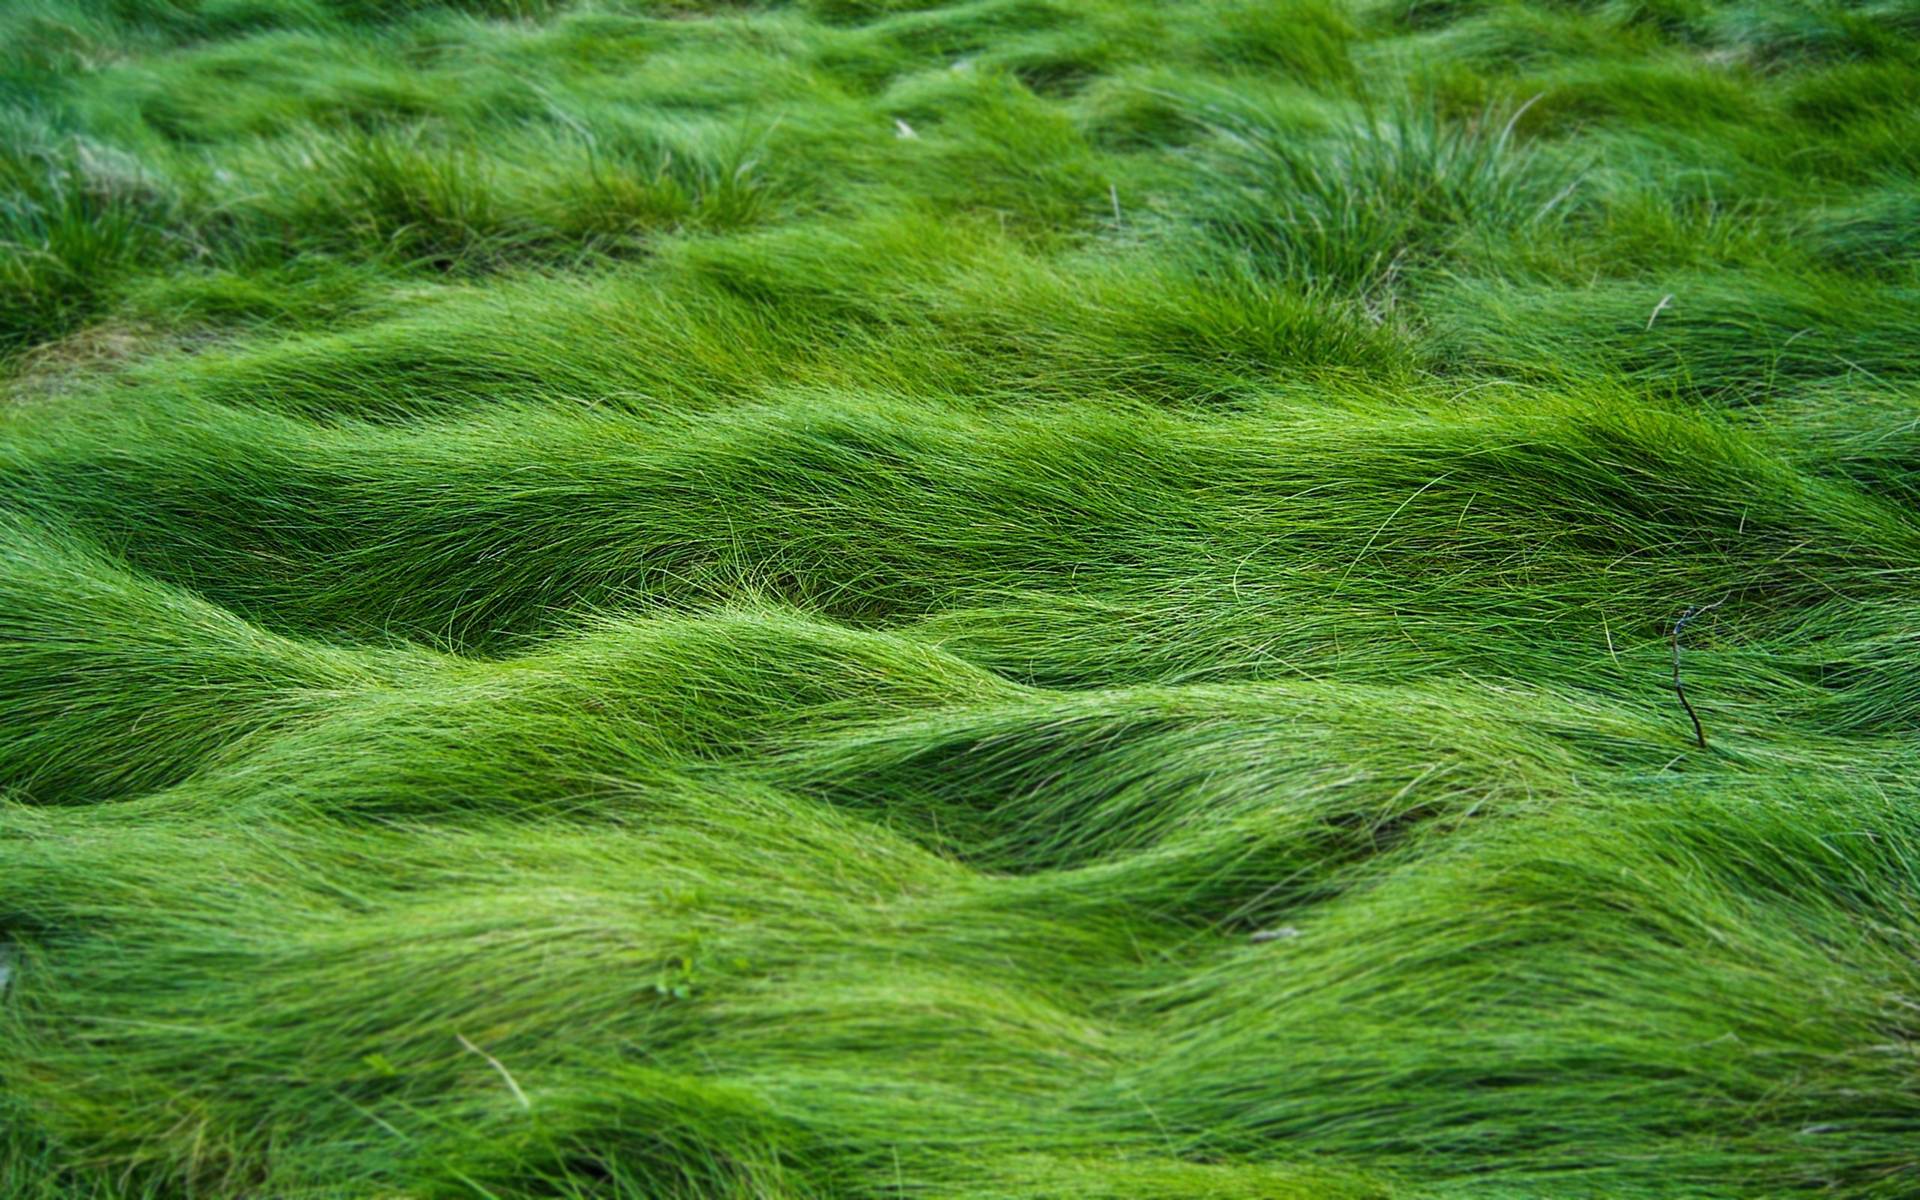 Overgrown grass wallpapers and images   wallpapers pictures photos